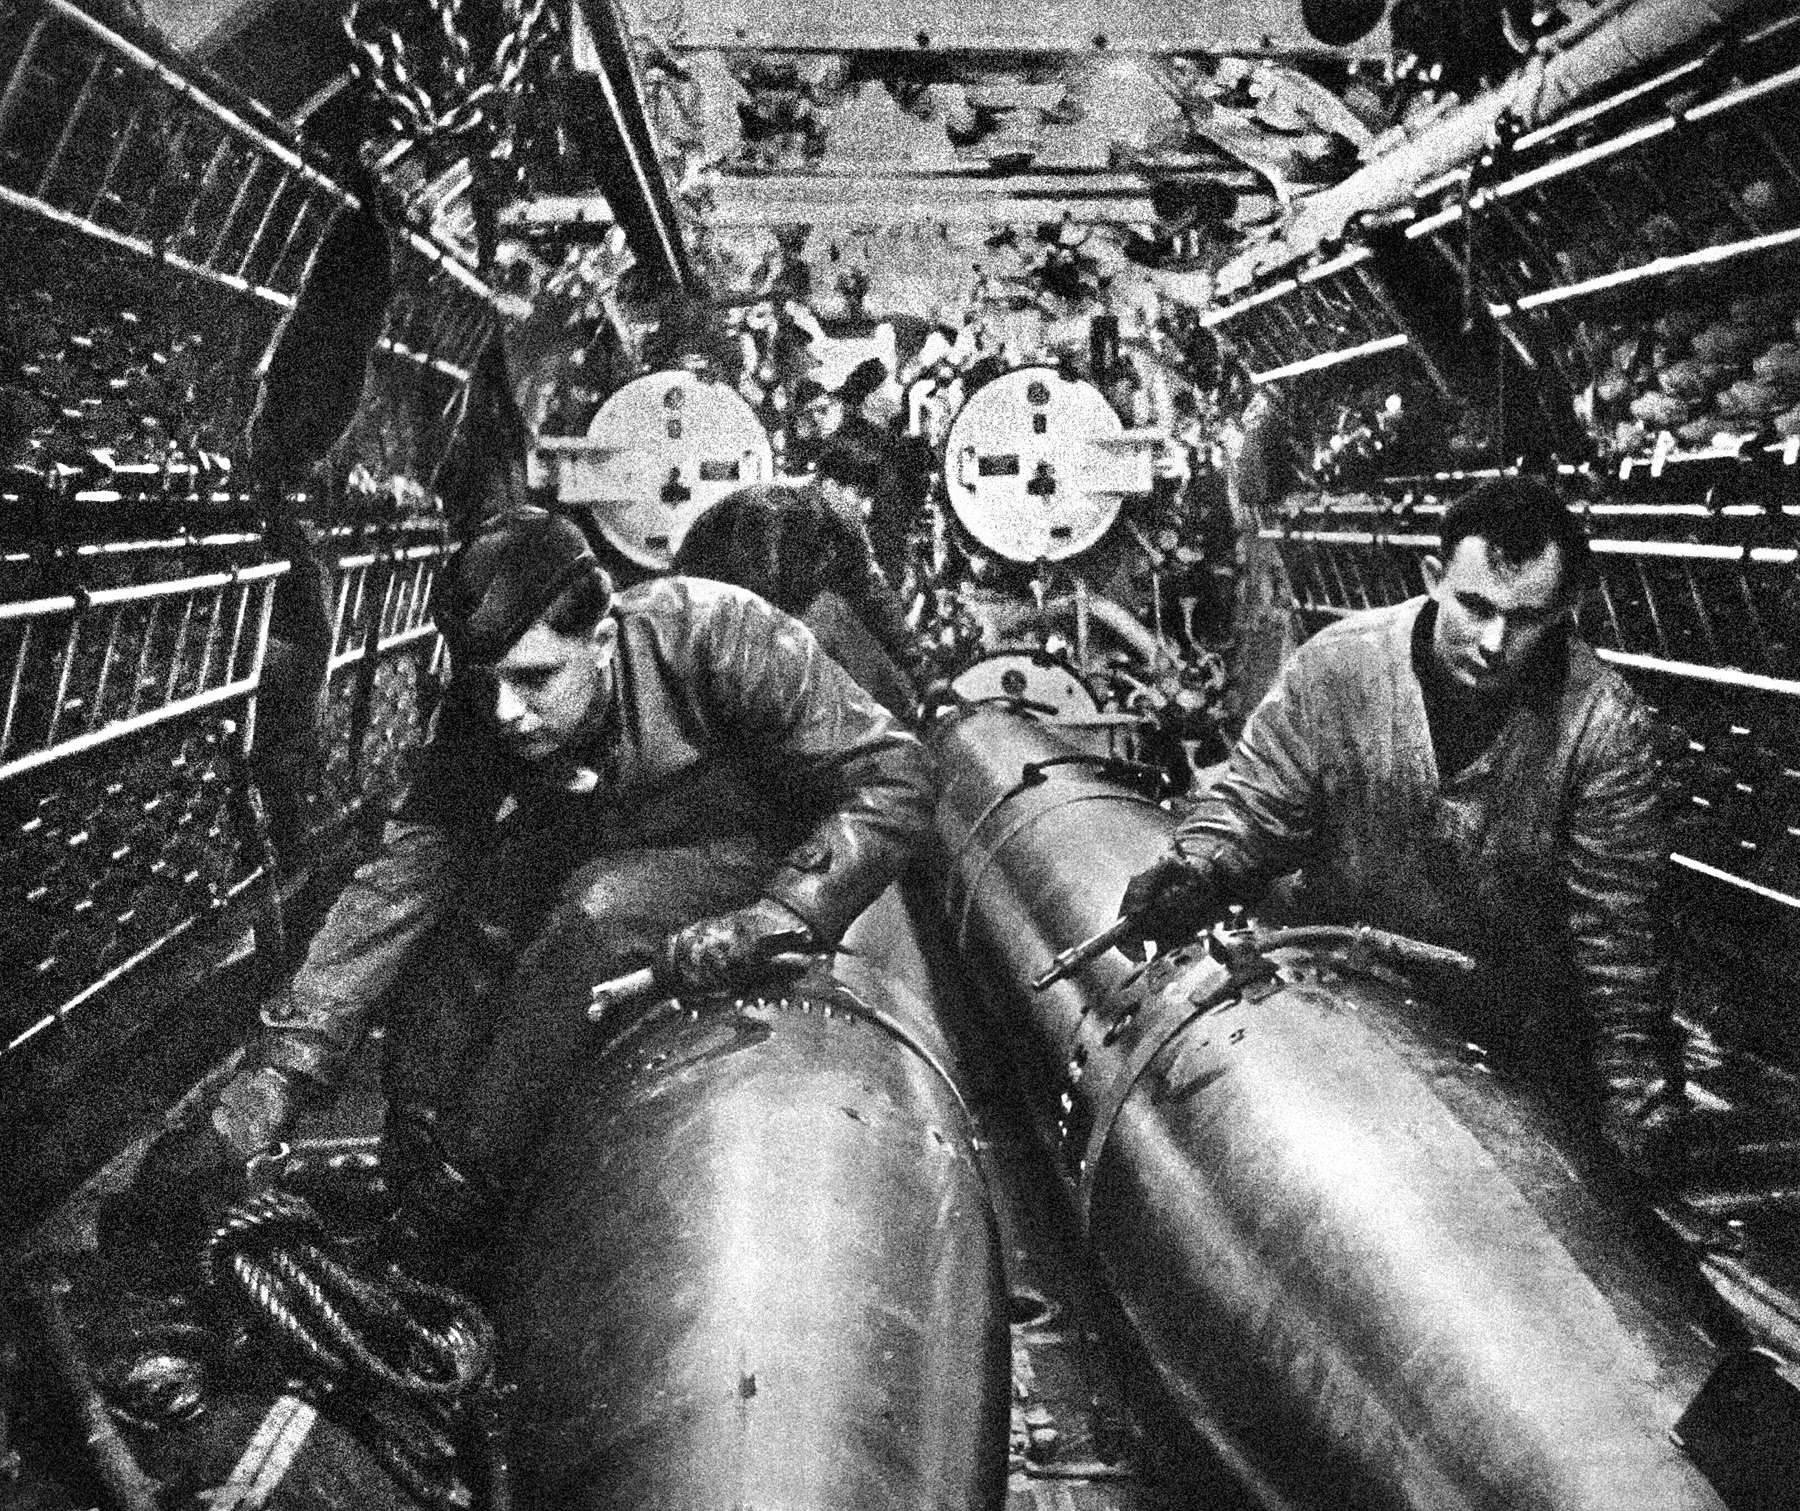 The cramped quarters aboard Nazi U-boats are visible in this image of crewmen working feverishly in the torpedo room aboard one of the German submarines. The sailors are handling torpedoes for use in the tubes, which are visible at the rear. 